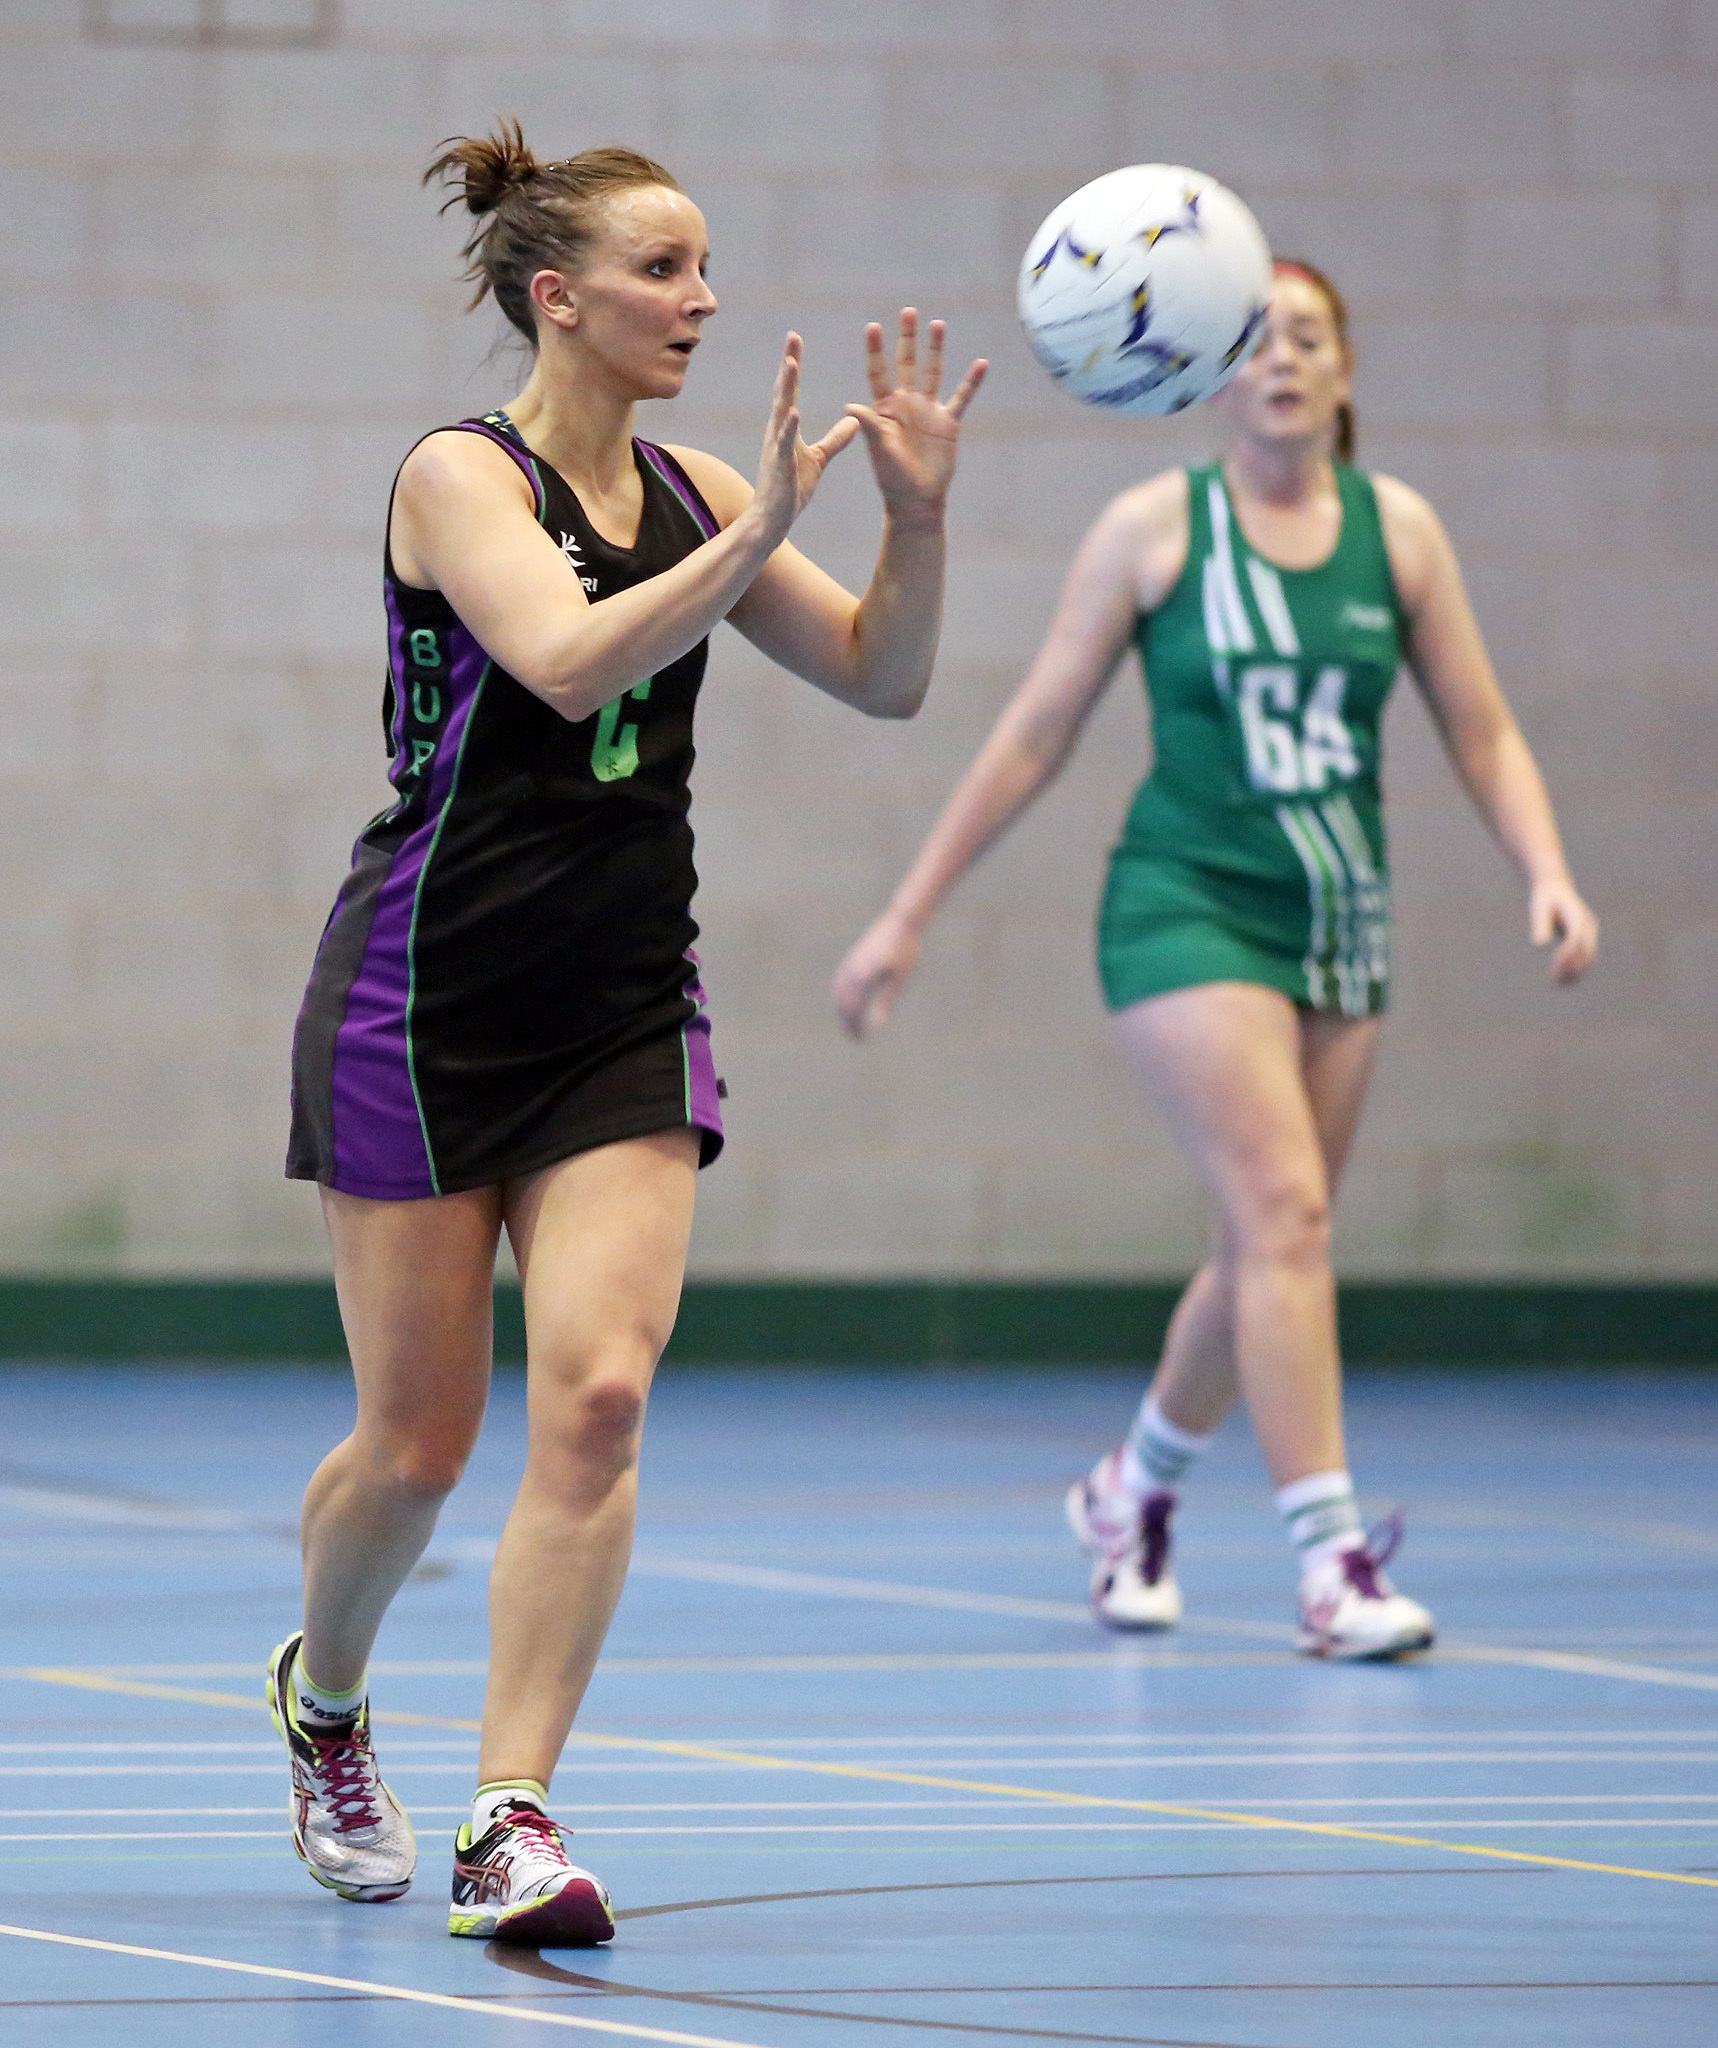 NETBALL: YWCA Bury keep up the pressure on Premier table-toppers - Bury Times